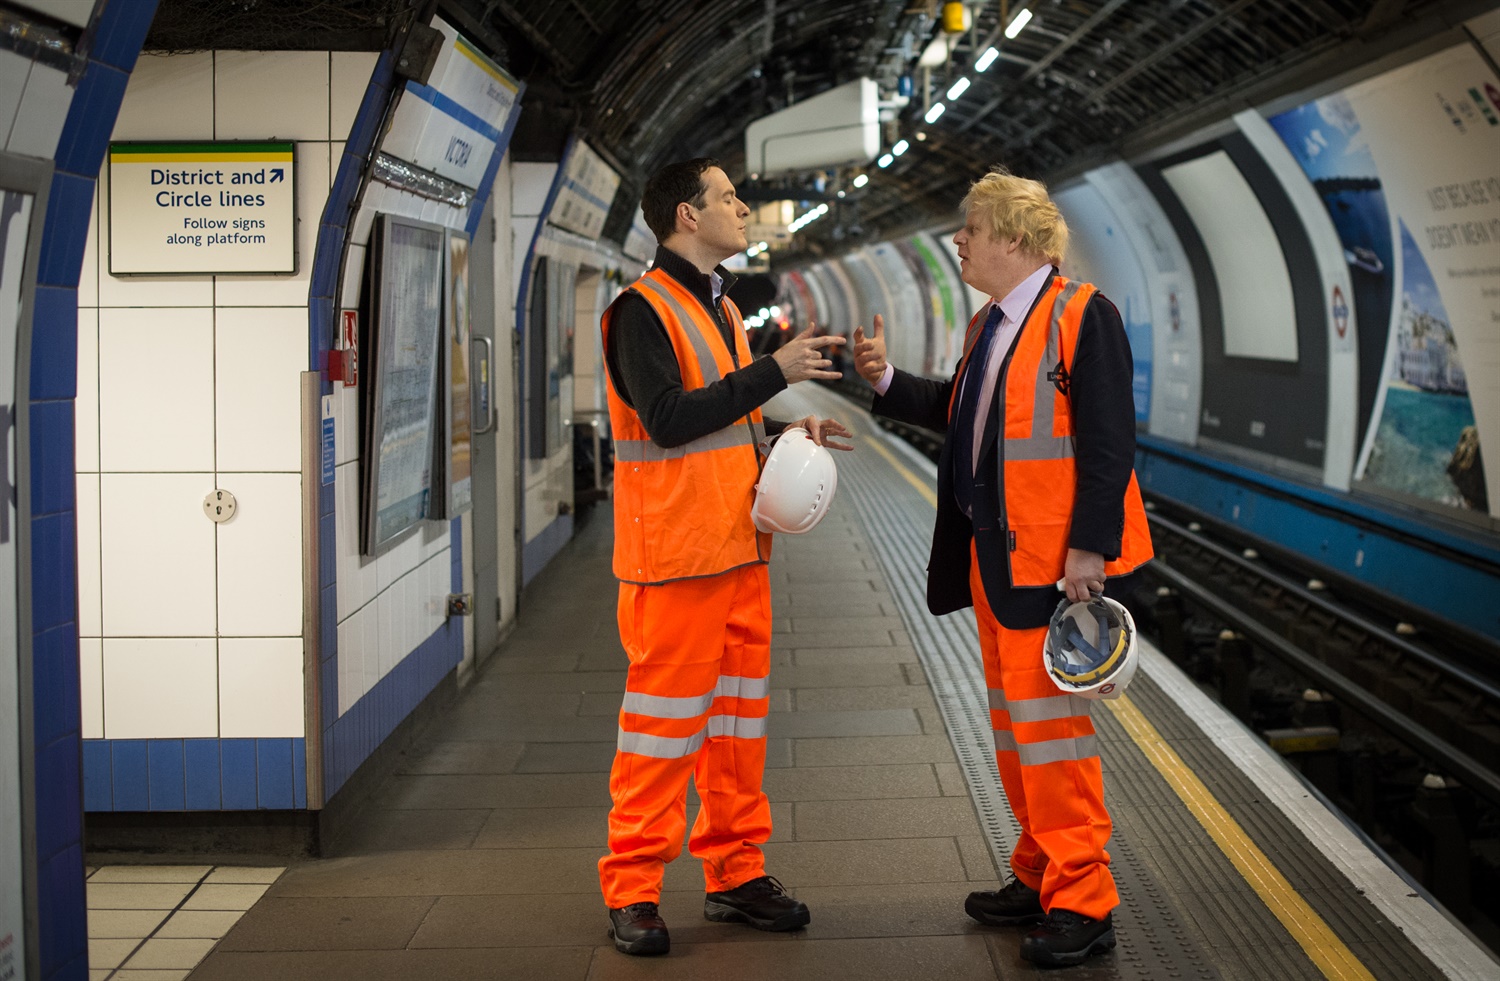 Osborne and Boris plans for more 24-hour Tube services dubbed ‘pre-election stunt’